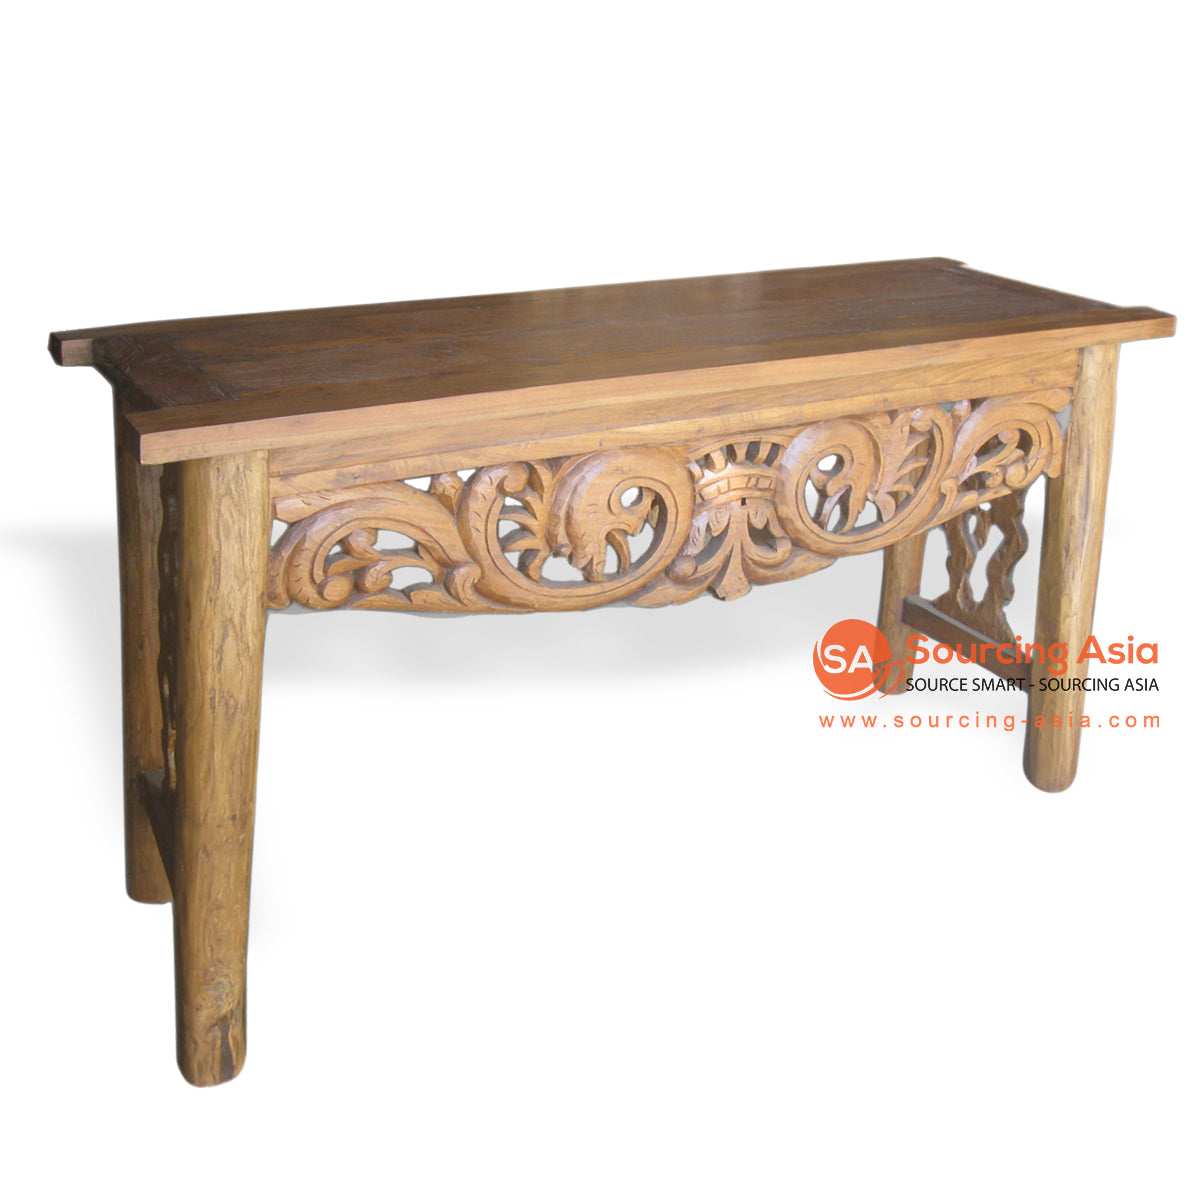 LAC016 NATURAL RECYCLED TEAK WOOD CARVED CONSOLE